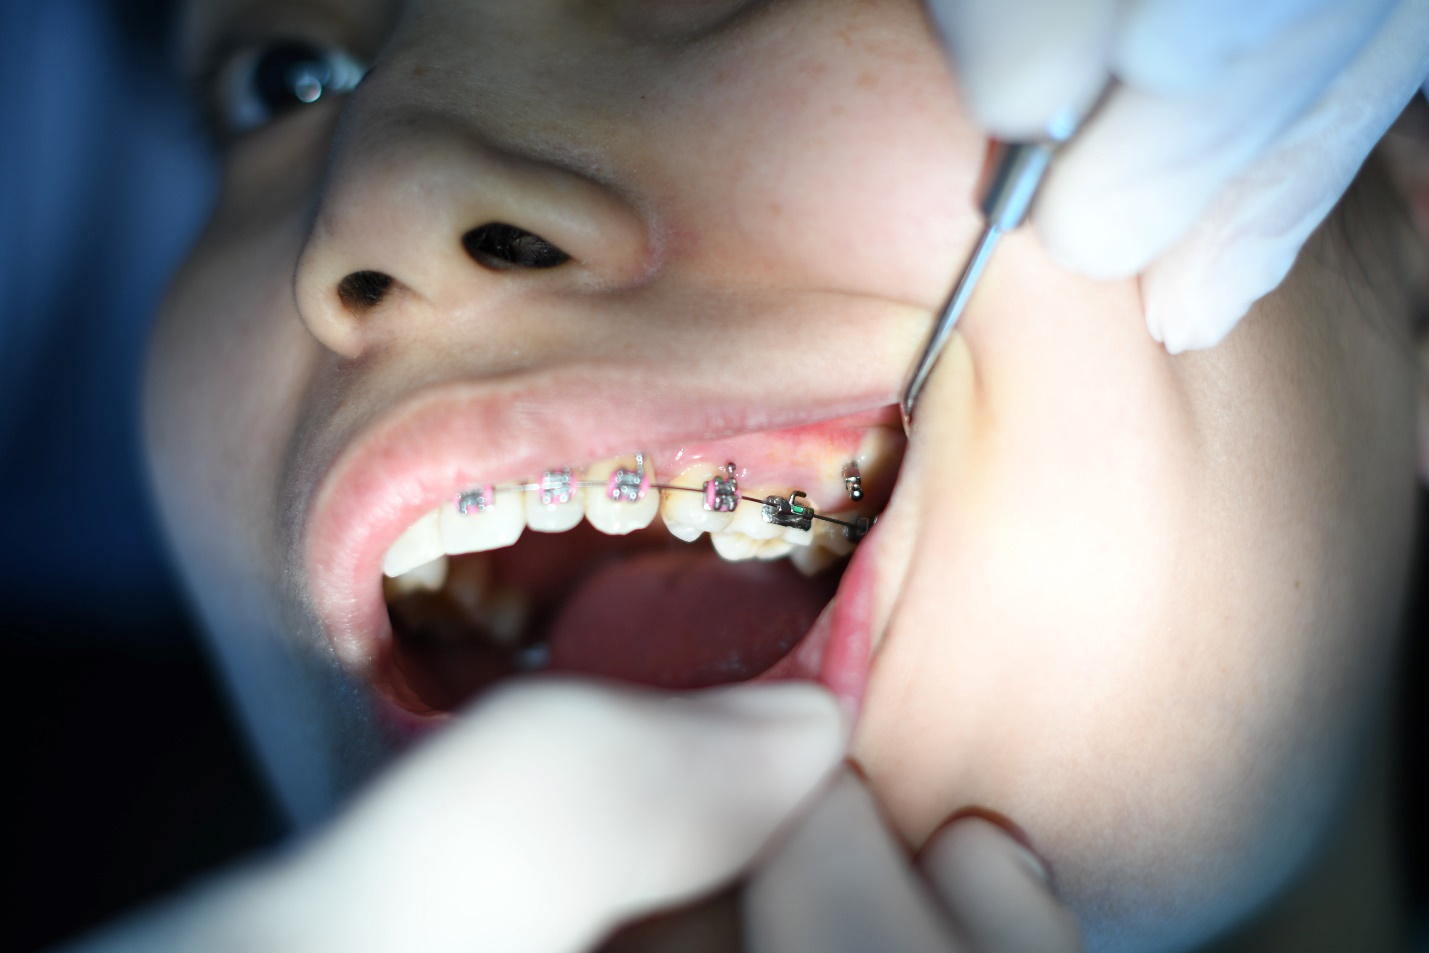 A dentist examining a patient's teeth

Description automatically generated with medium confidence